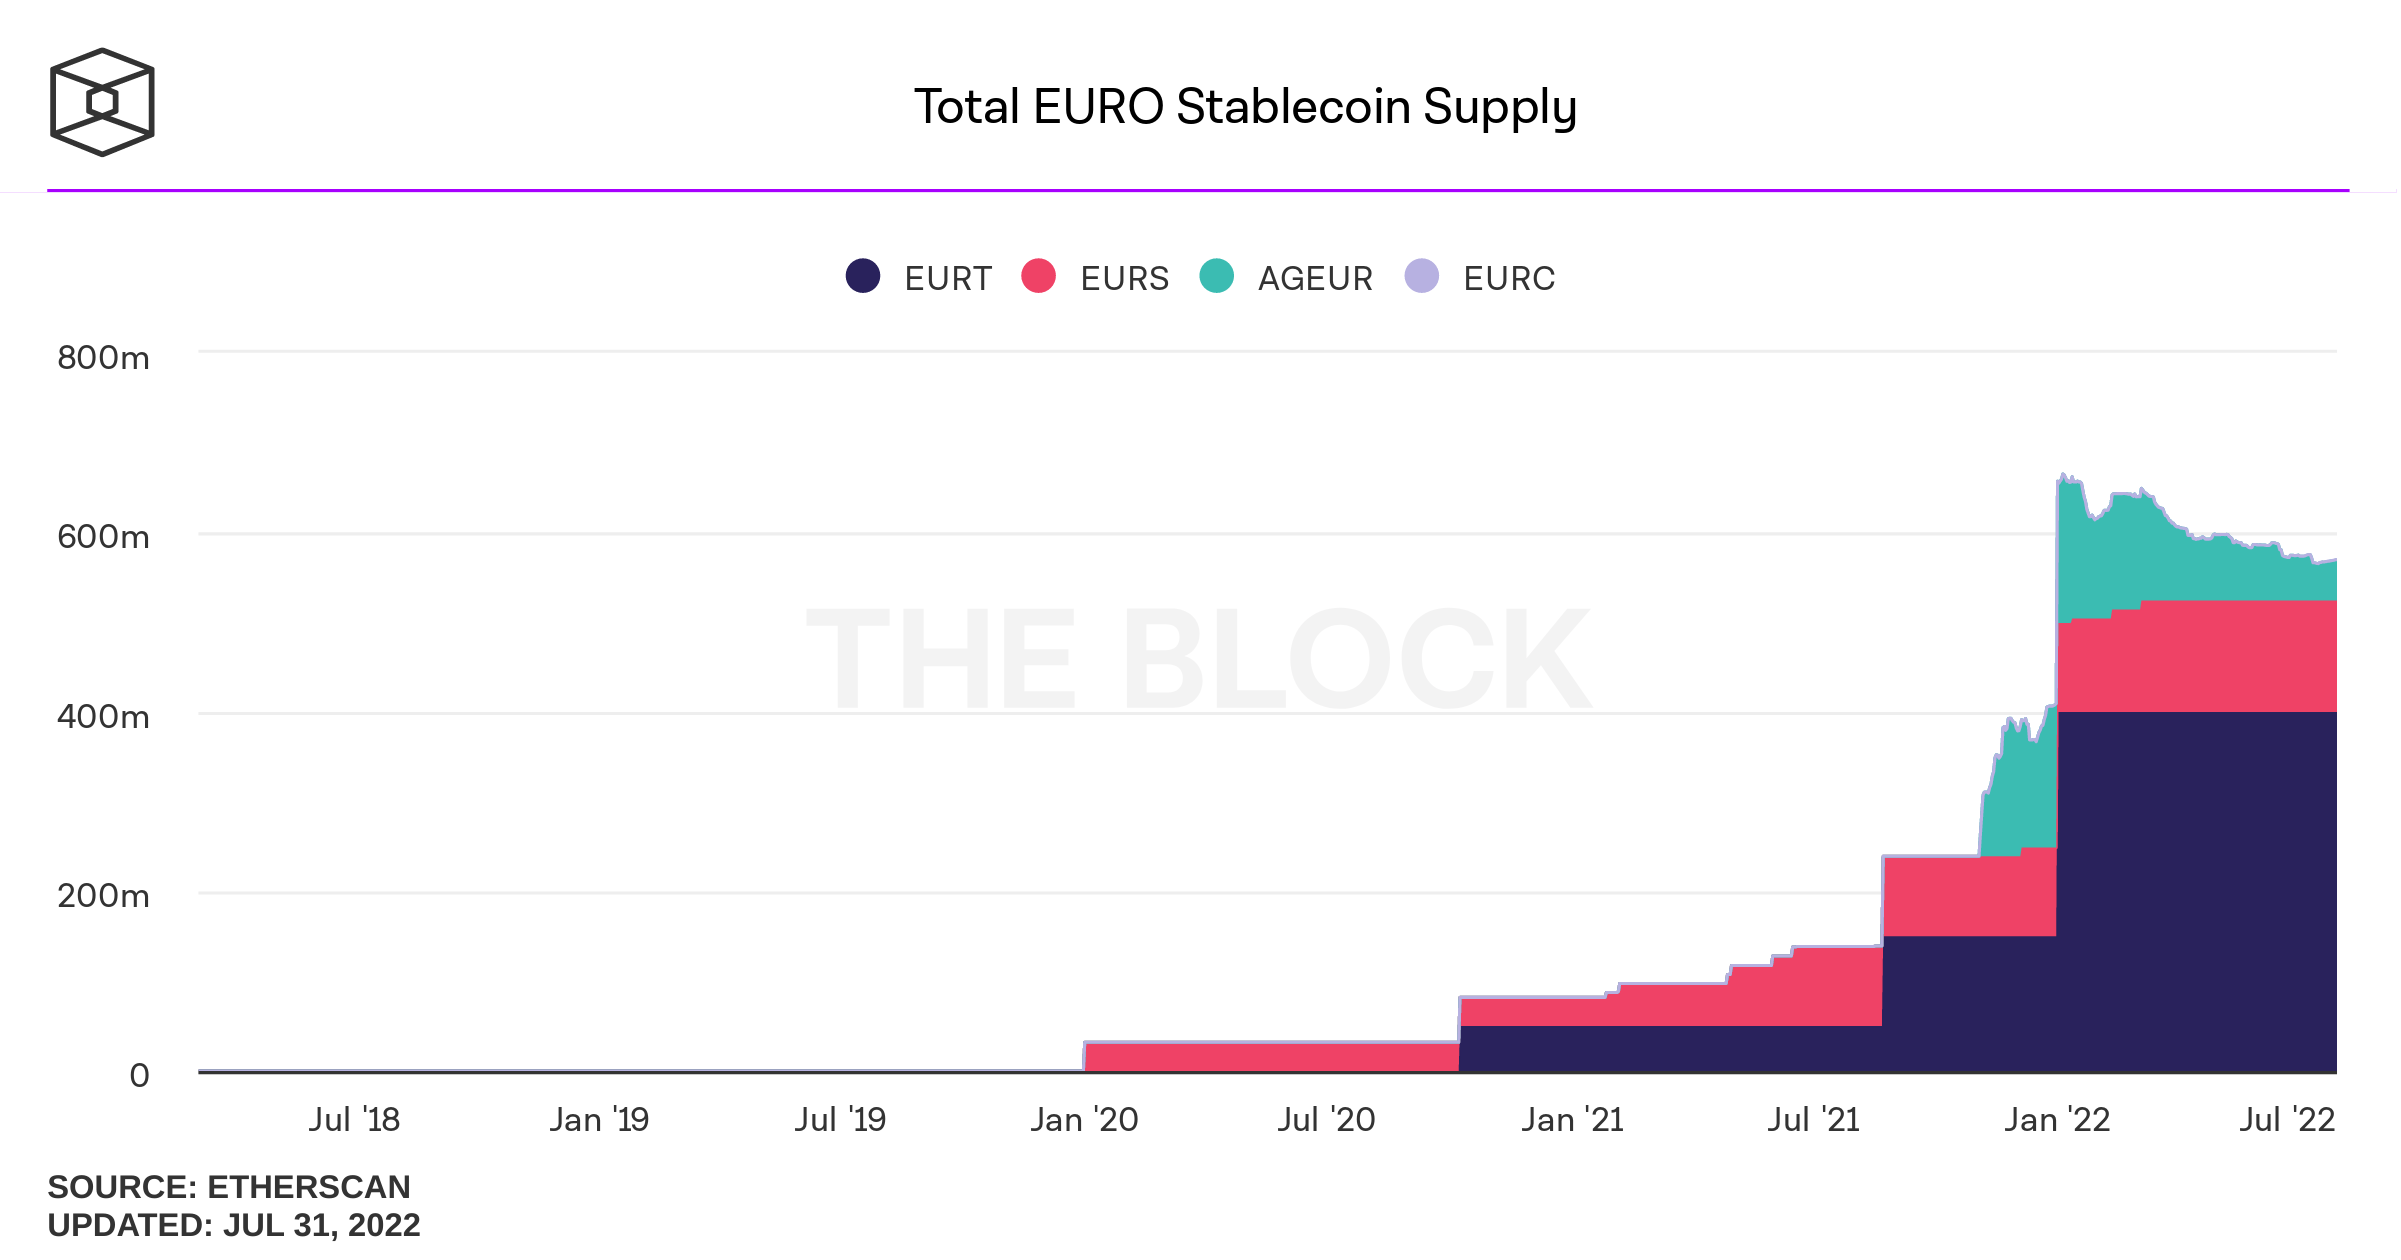 The number of euro-pegged stablecoins has grown by 1,683% since 2020